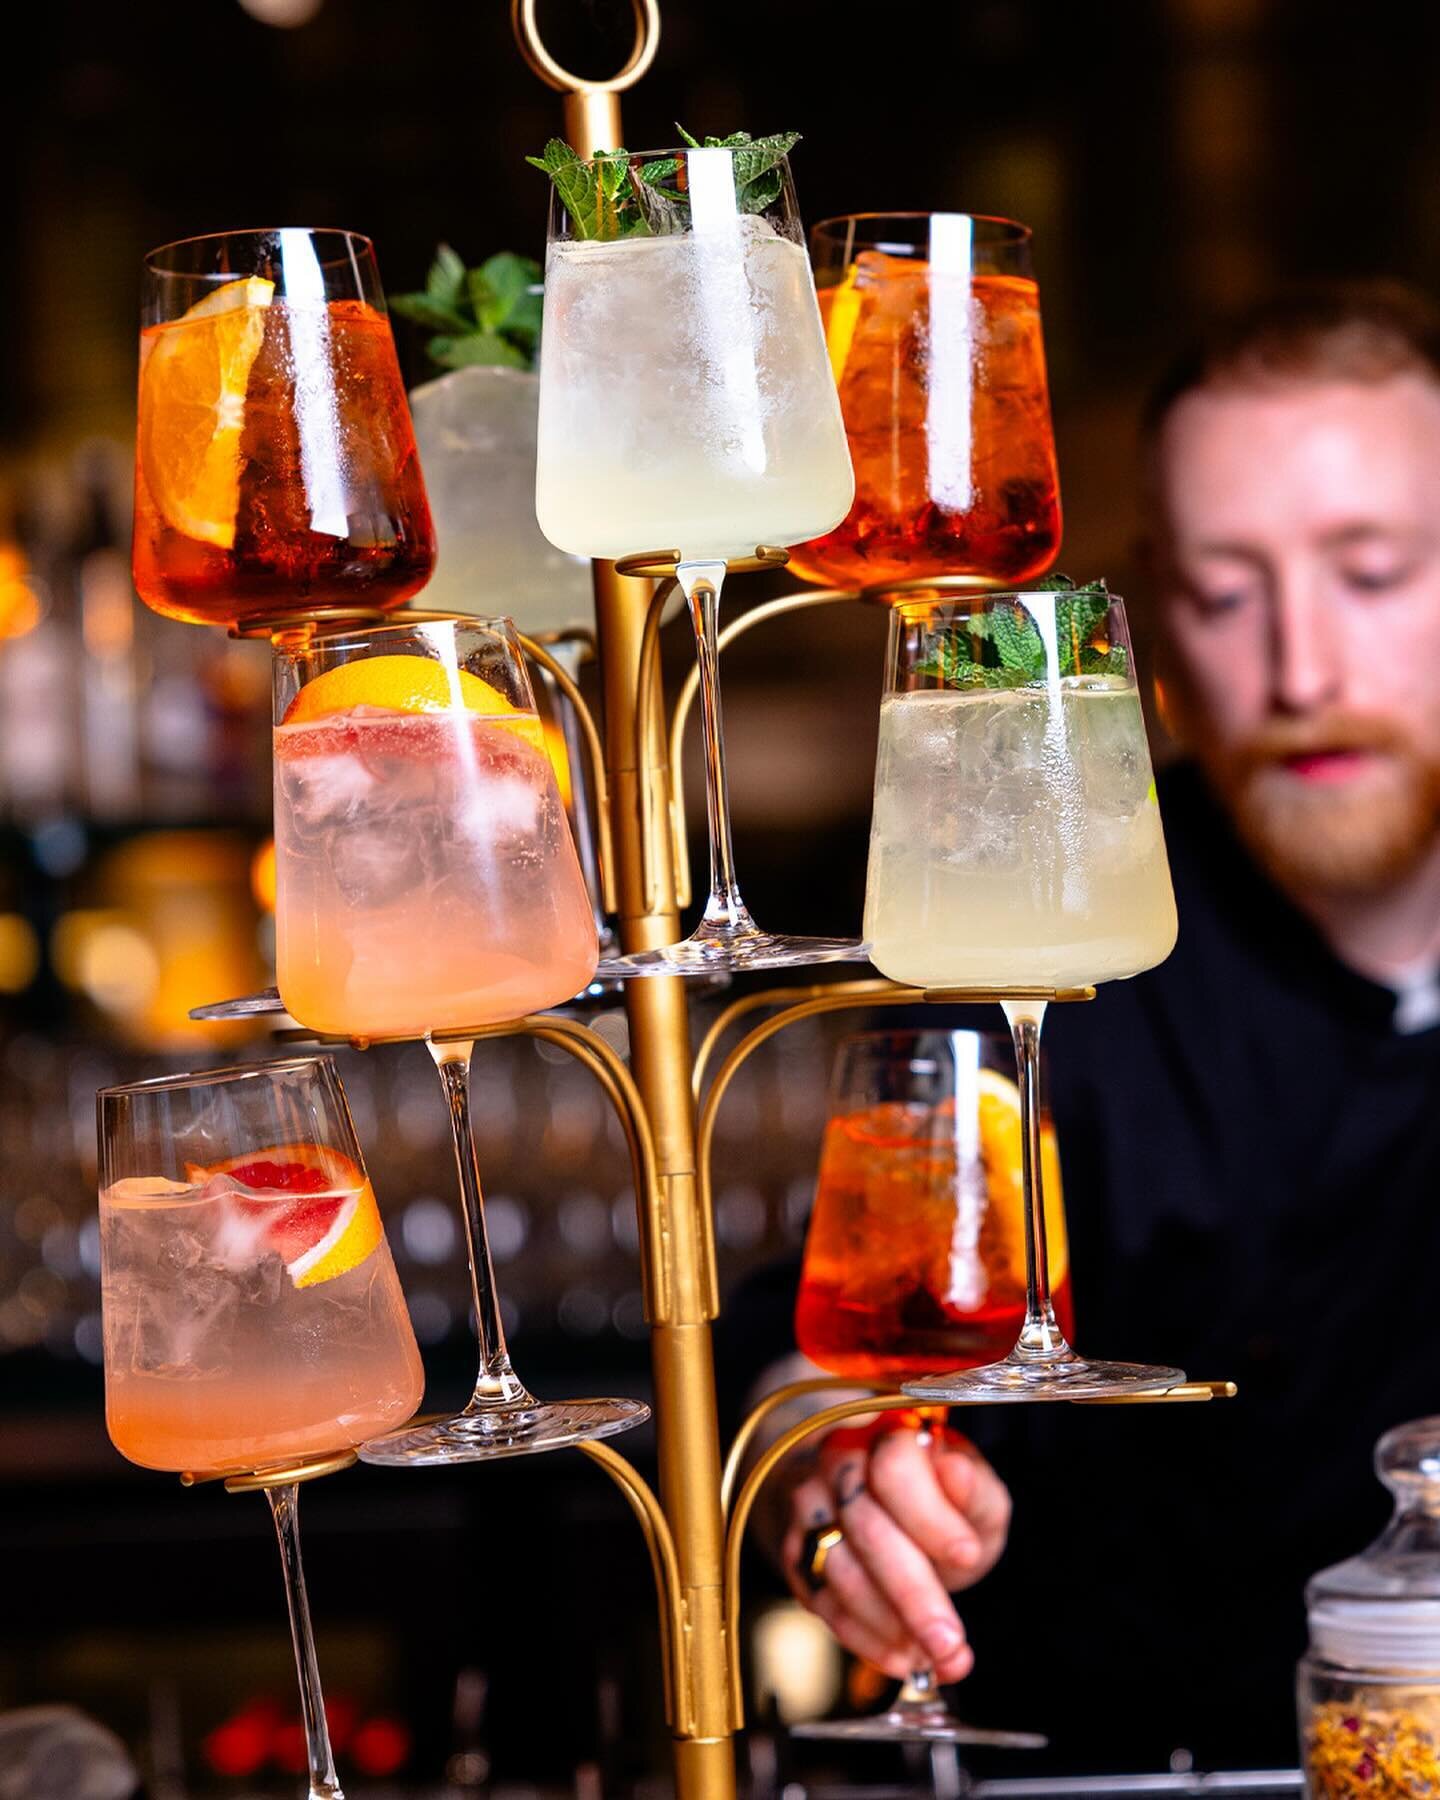 🎄 Got your Christmas tree sorted? 🤔

At SOOT bar, our Christmas tree isn&rsquo;t your usual pine; it&rsquo;s a bit different&mdash;it&rsquo;s a cocktail tree! 🌲🍹 Decked with more than just ornaments, it boasts the finest cocktails in Berlin. 🌟 F